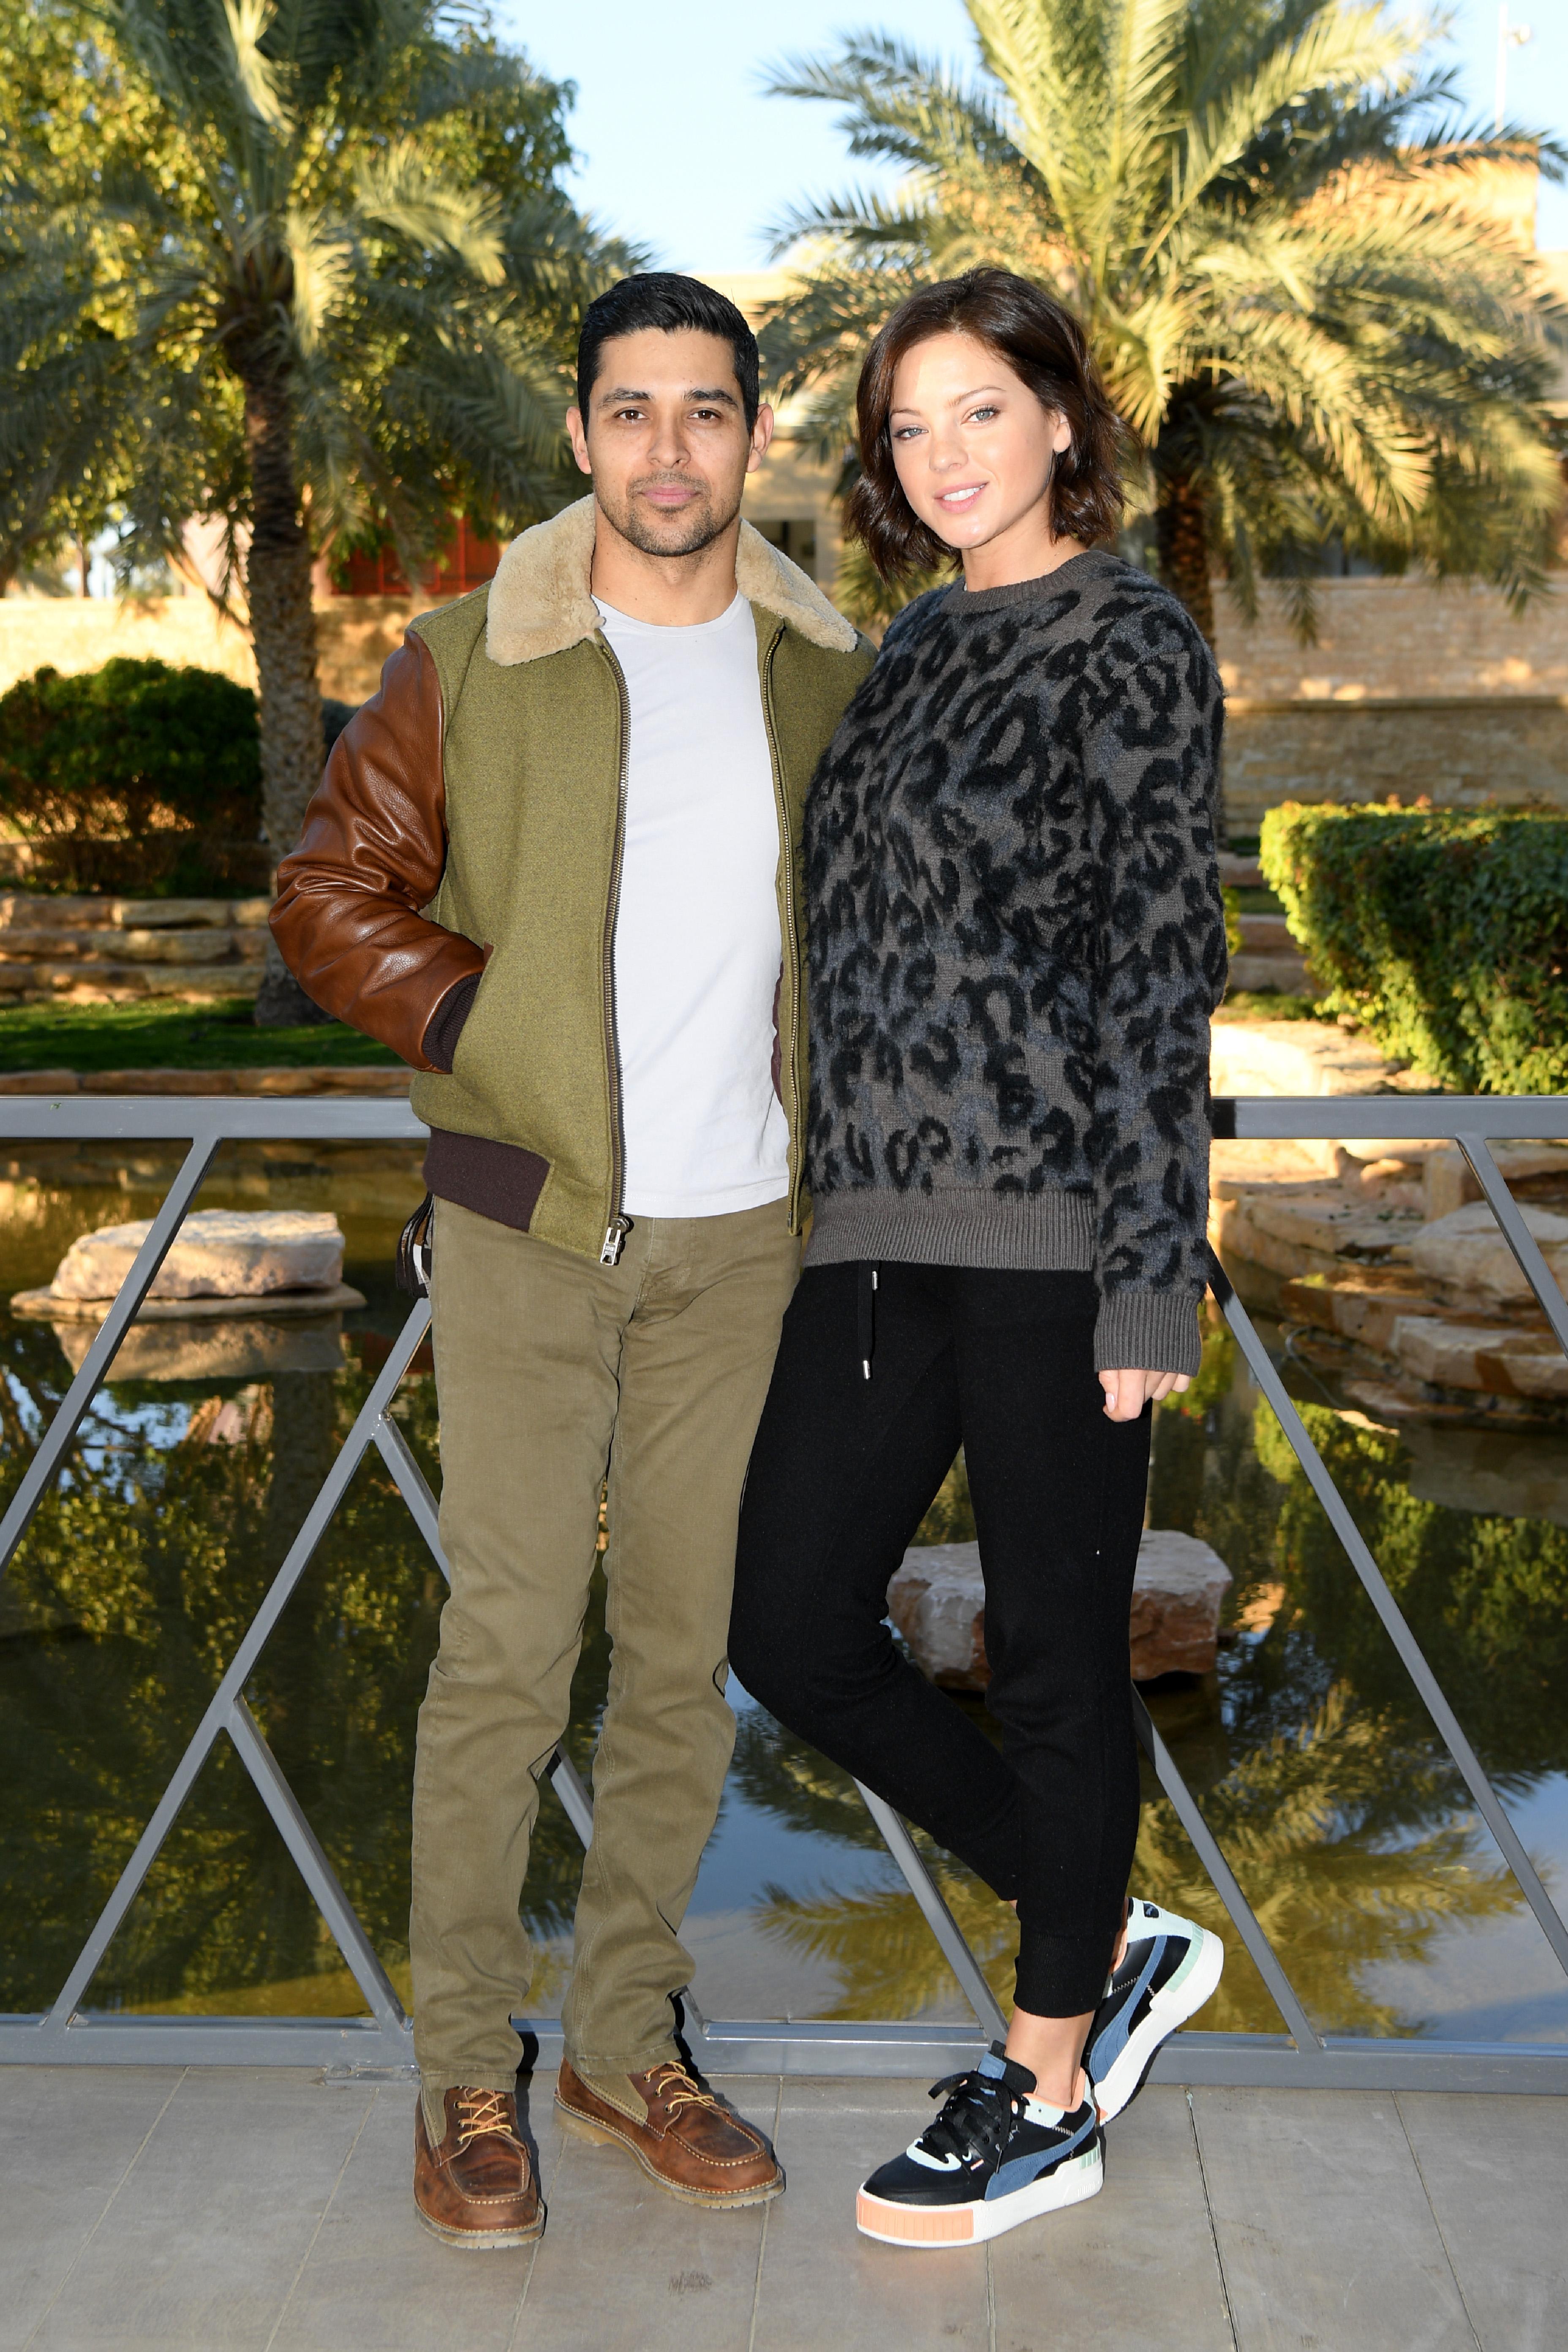 Wilmer Valderrama Is Engaged: Here’s What You Should Know About His Model Fiancée